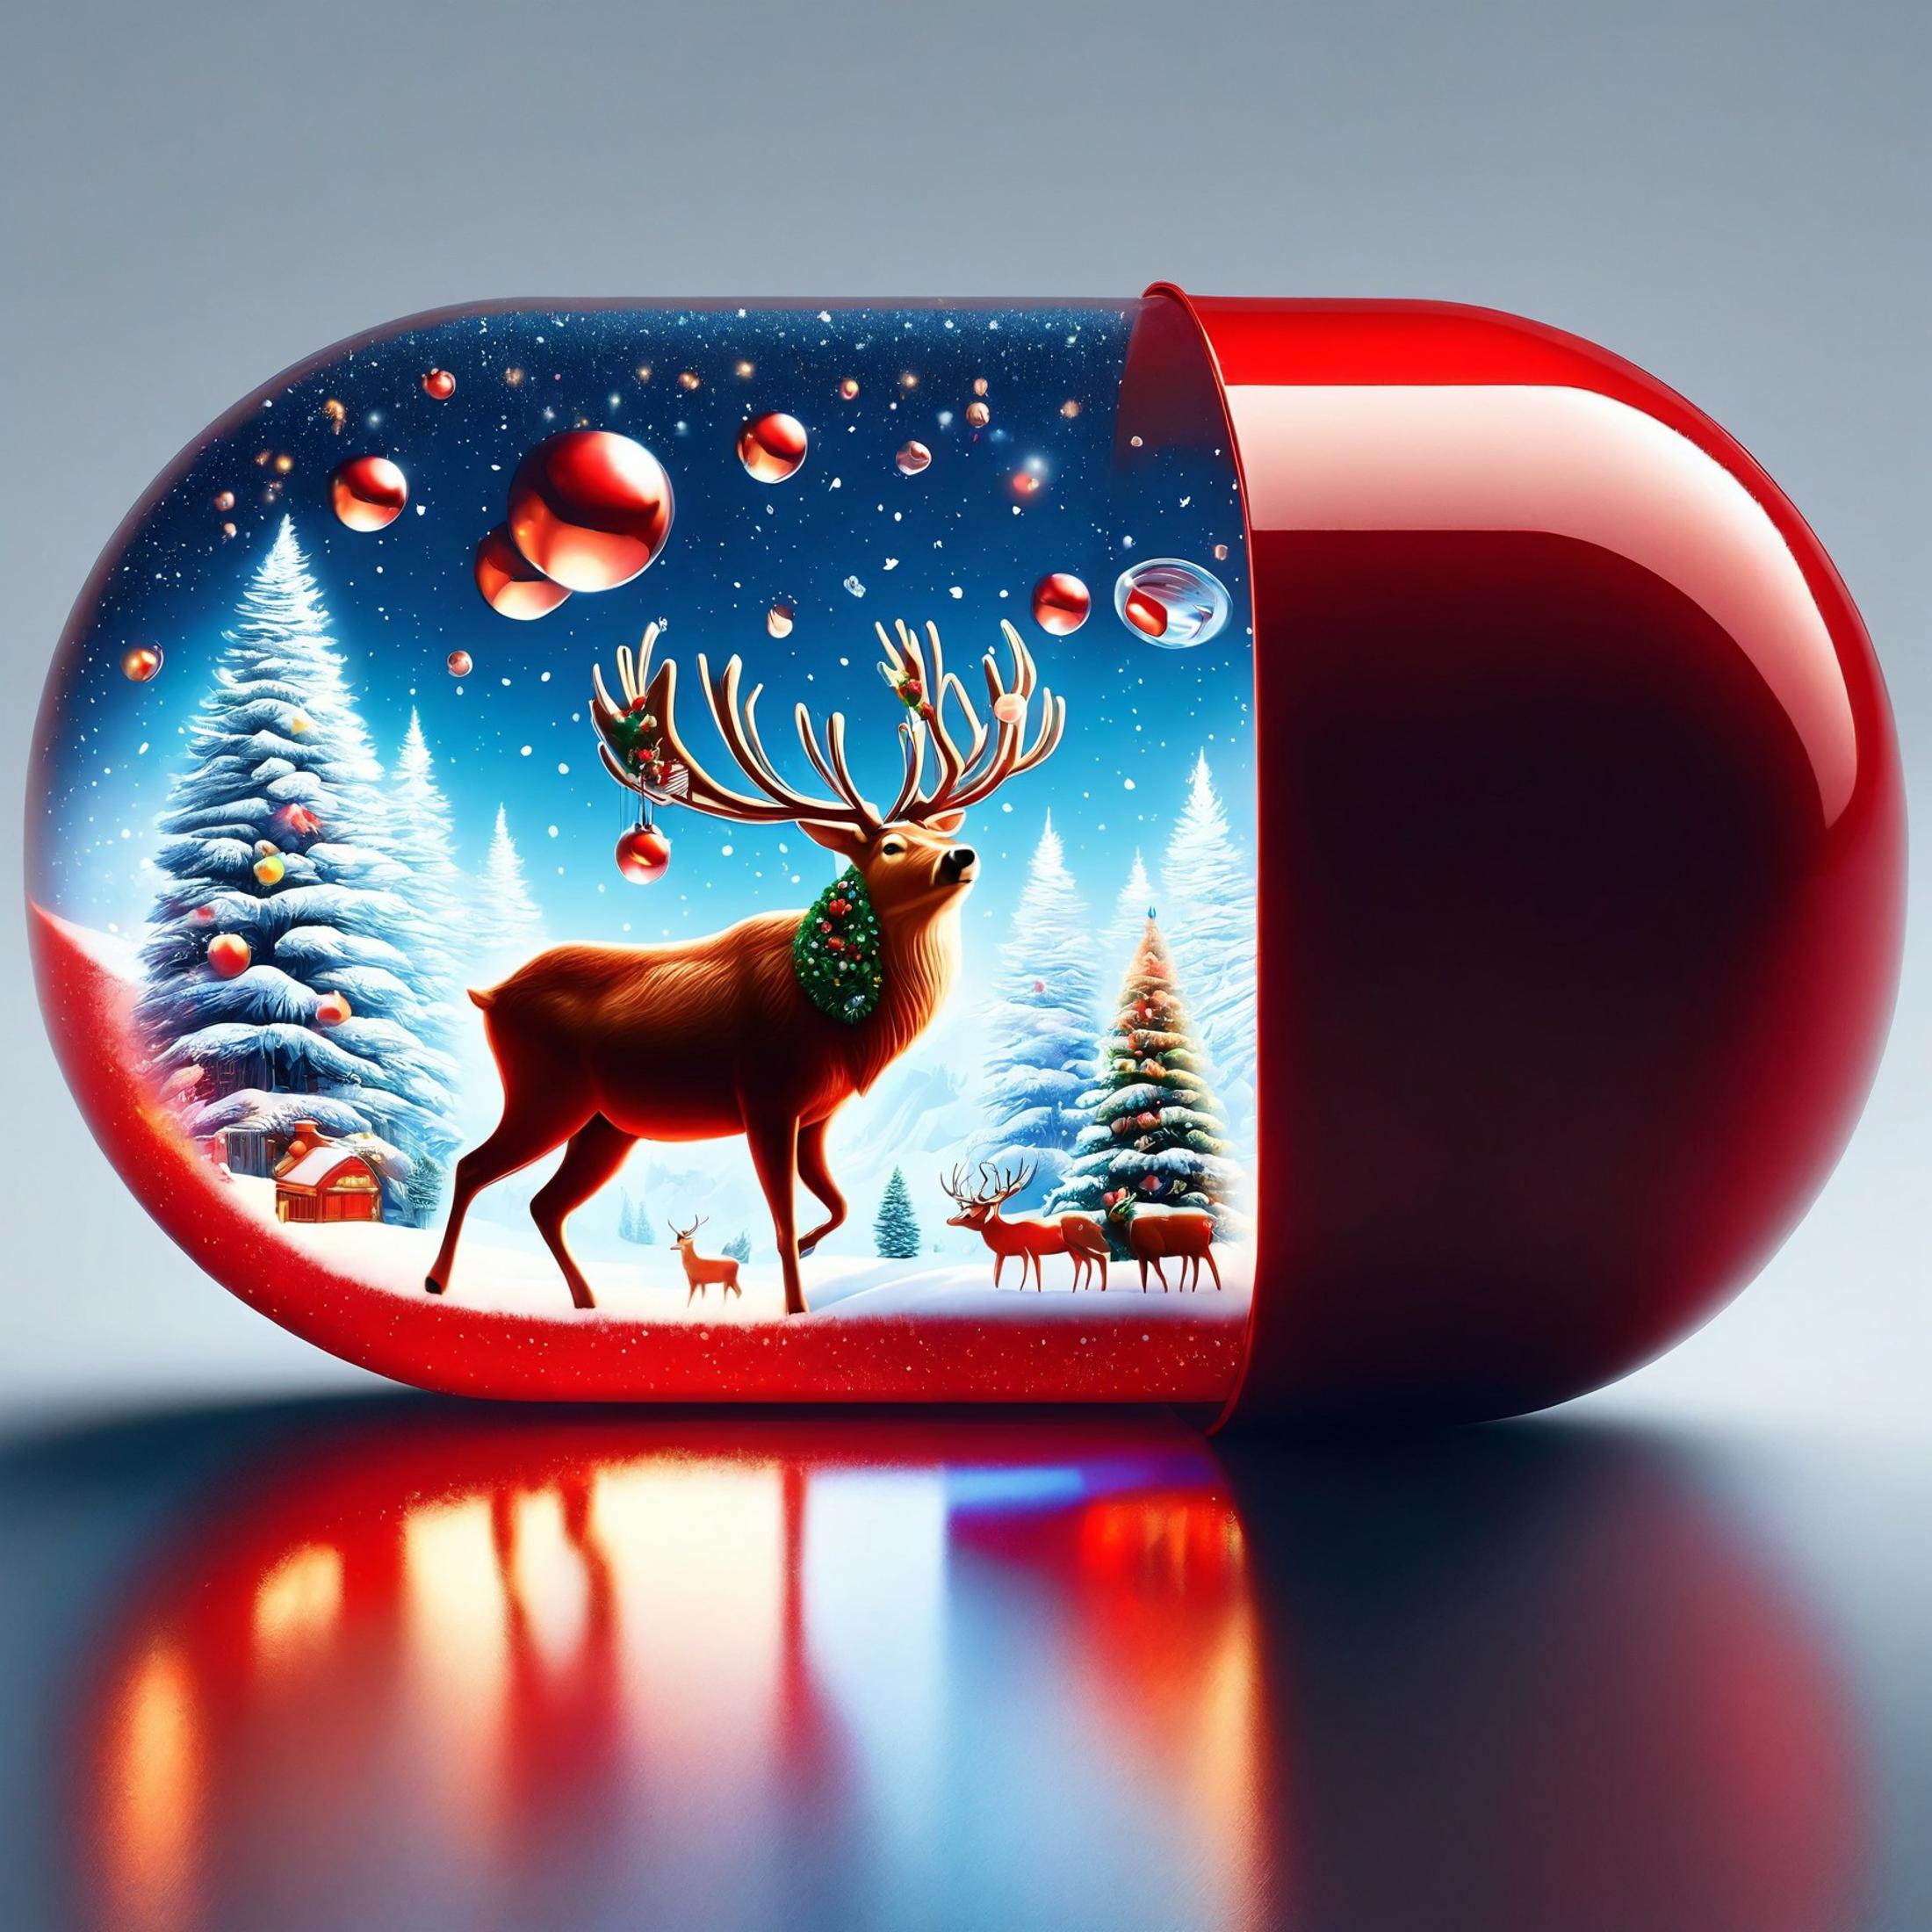 A red pill bottle with a Christmas scene painted on it.